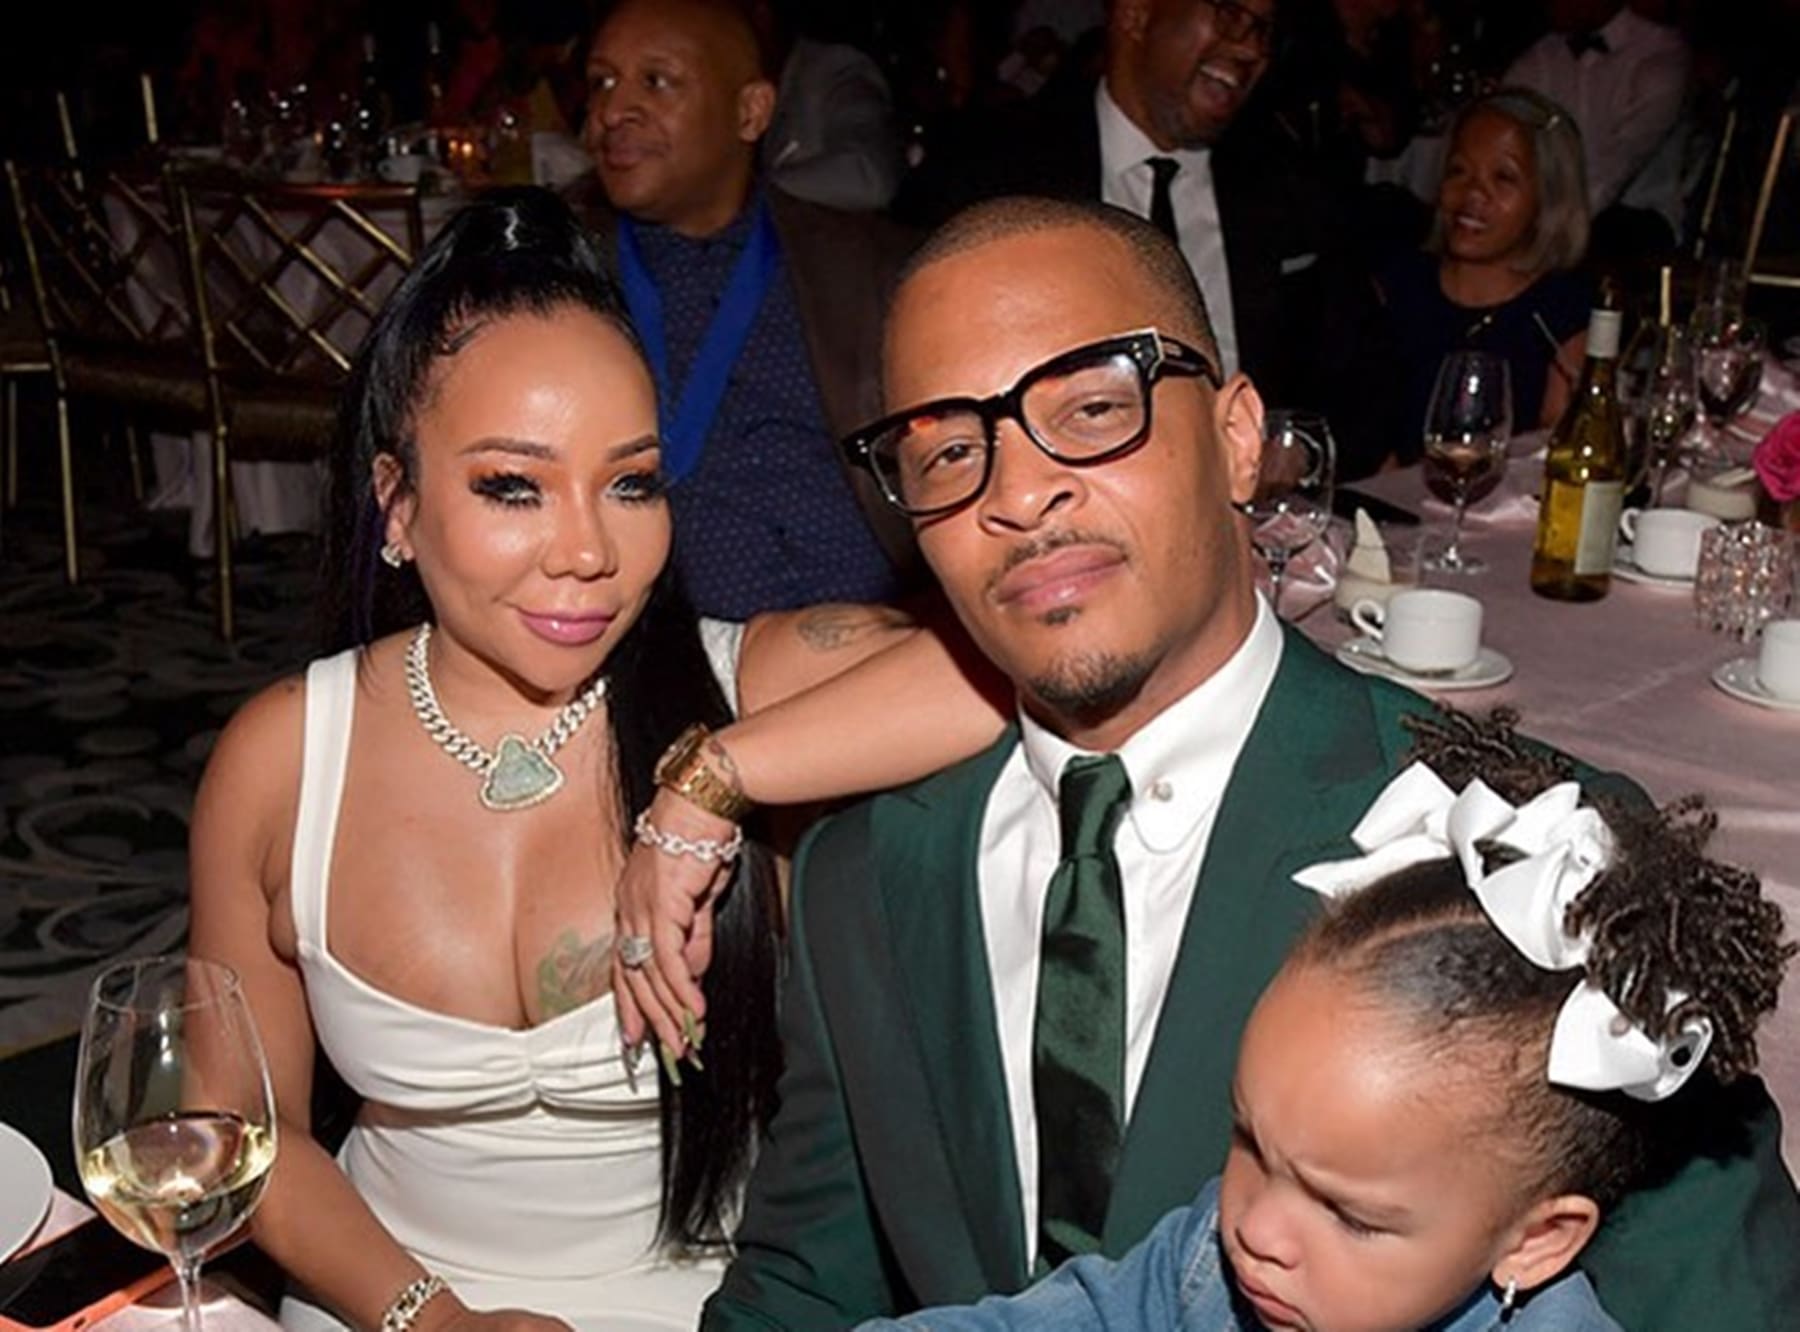 T.I. Is Twinning With His Baby Girl, Heiress Harris - See The Jaw-Dropping Photo